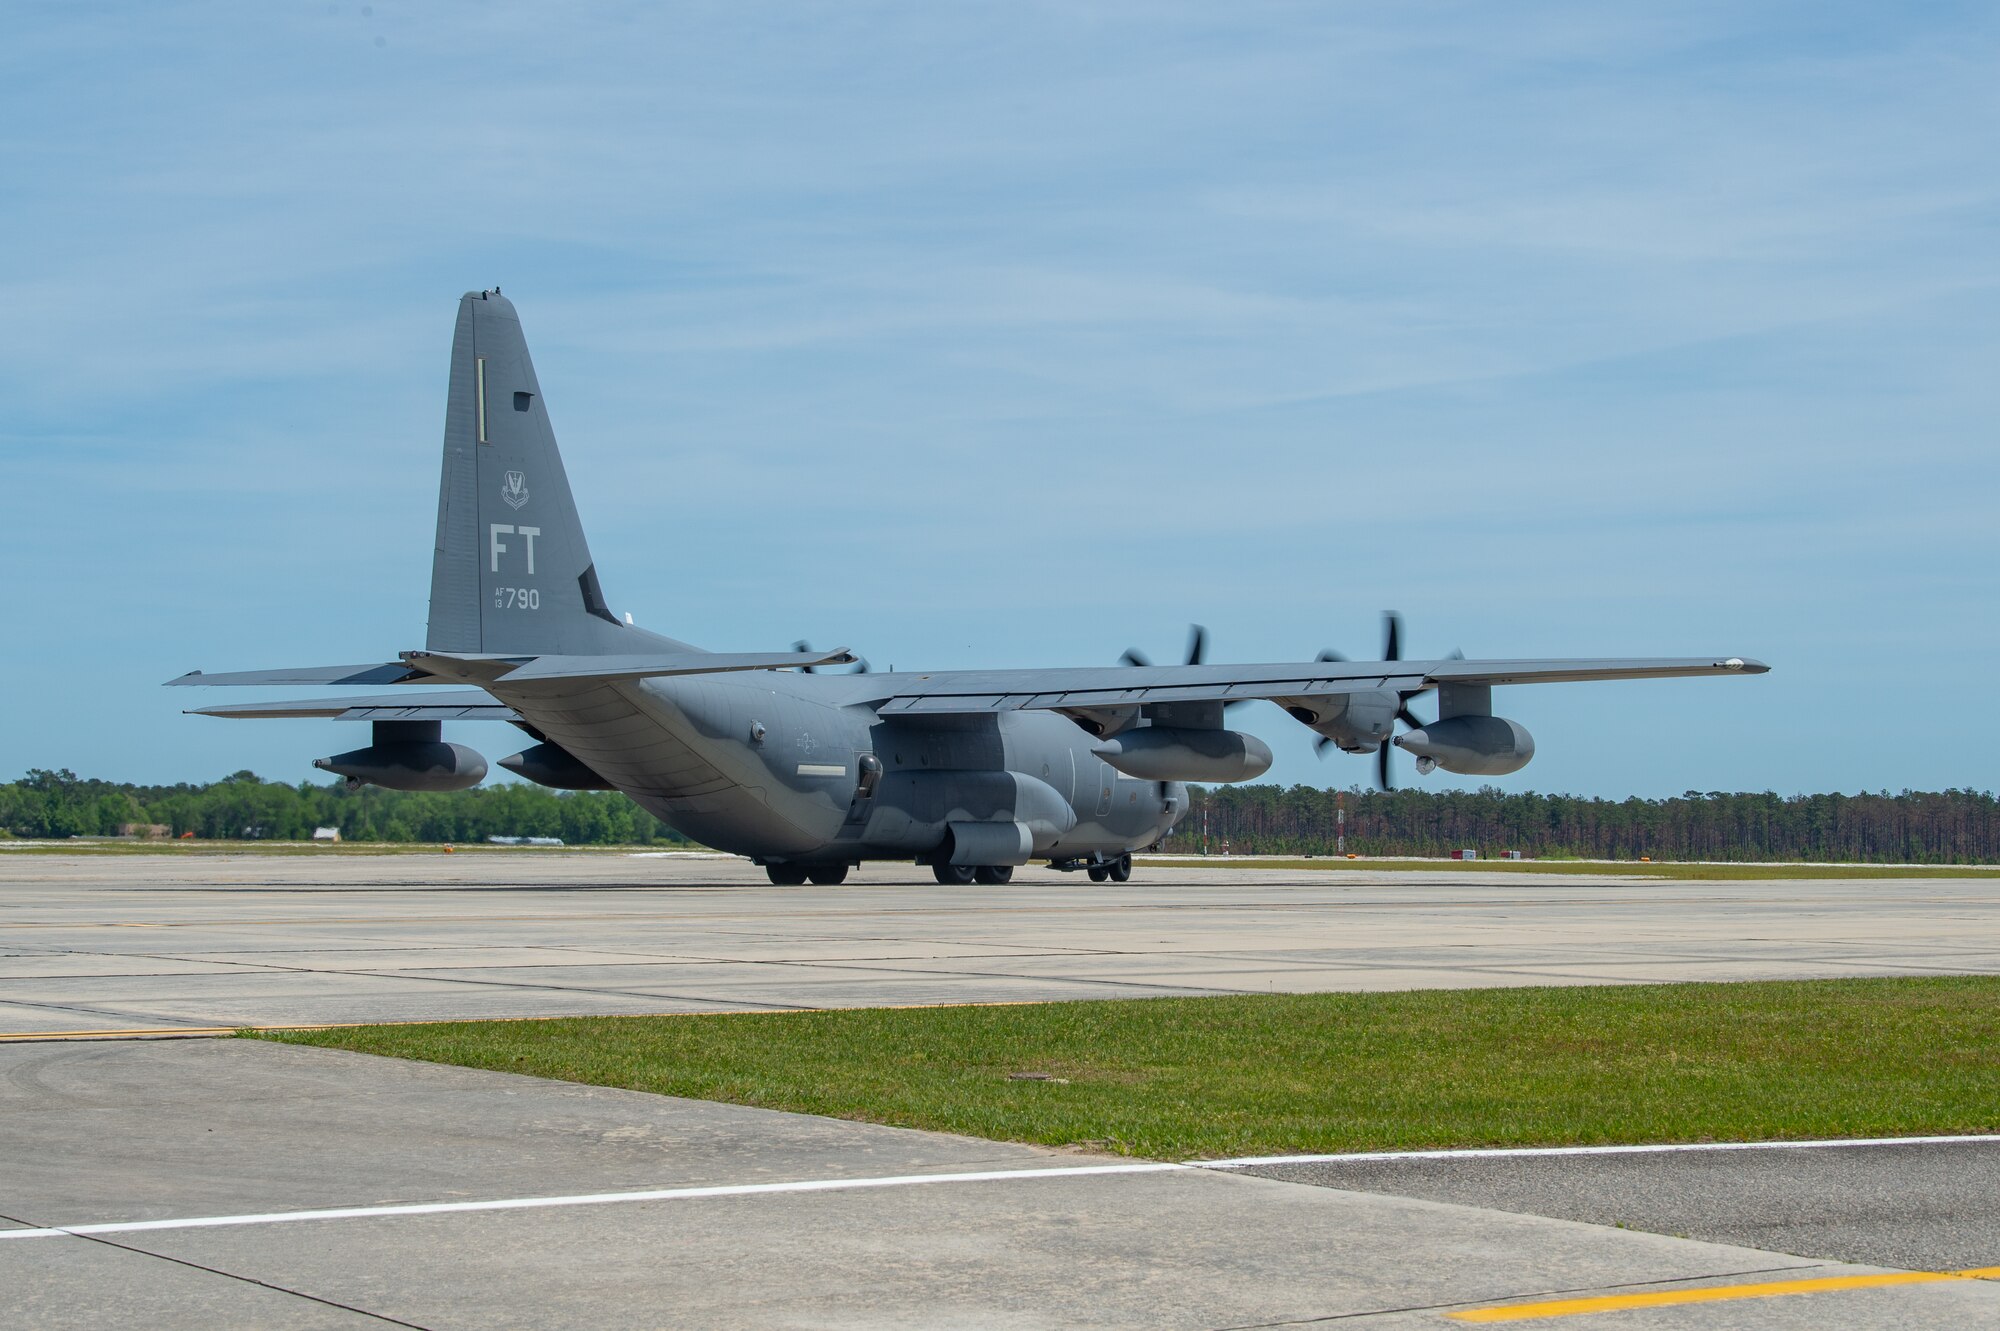 A U.S. Air Force HC-130J Combat King II assigned to the 71st Rescue Squadron prepares to take to the skies in support of Exercise Ready Tiger 24-1 at Moody Air Force Base, Georgia, April 8, 2024. The 71st Rescue Squadron played a vital role in the exercise as they transported personnel and equipment to the various exercise locations. Built upon Air Combat Command's directive to assert air power in contested environments, Exercise Ready Tiger 24-1 aims to test and enhance the 23rd Wing’s proficiency in executing Lead Wing and Expeditionary Air Base concepts through Agile Combat Employment and command and control operations. (U.S. Air Force photo by Airman 1st Class Iain Stanley)